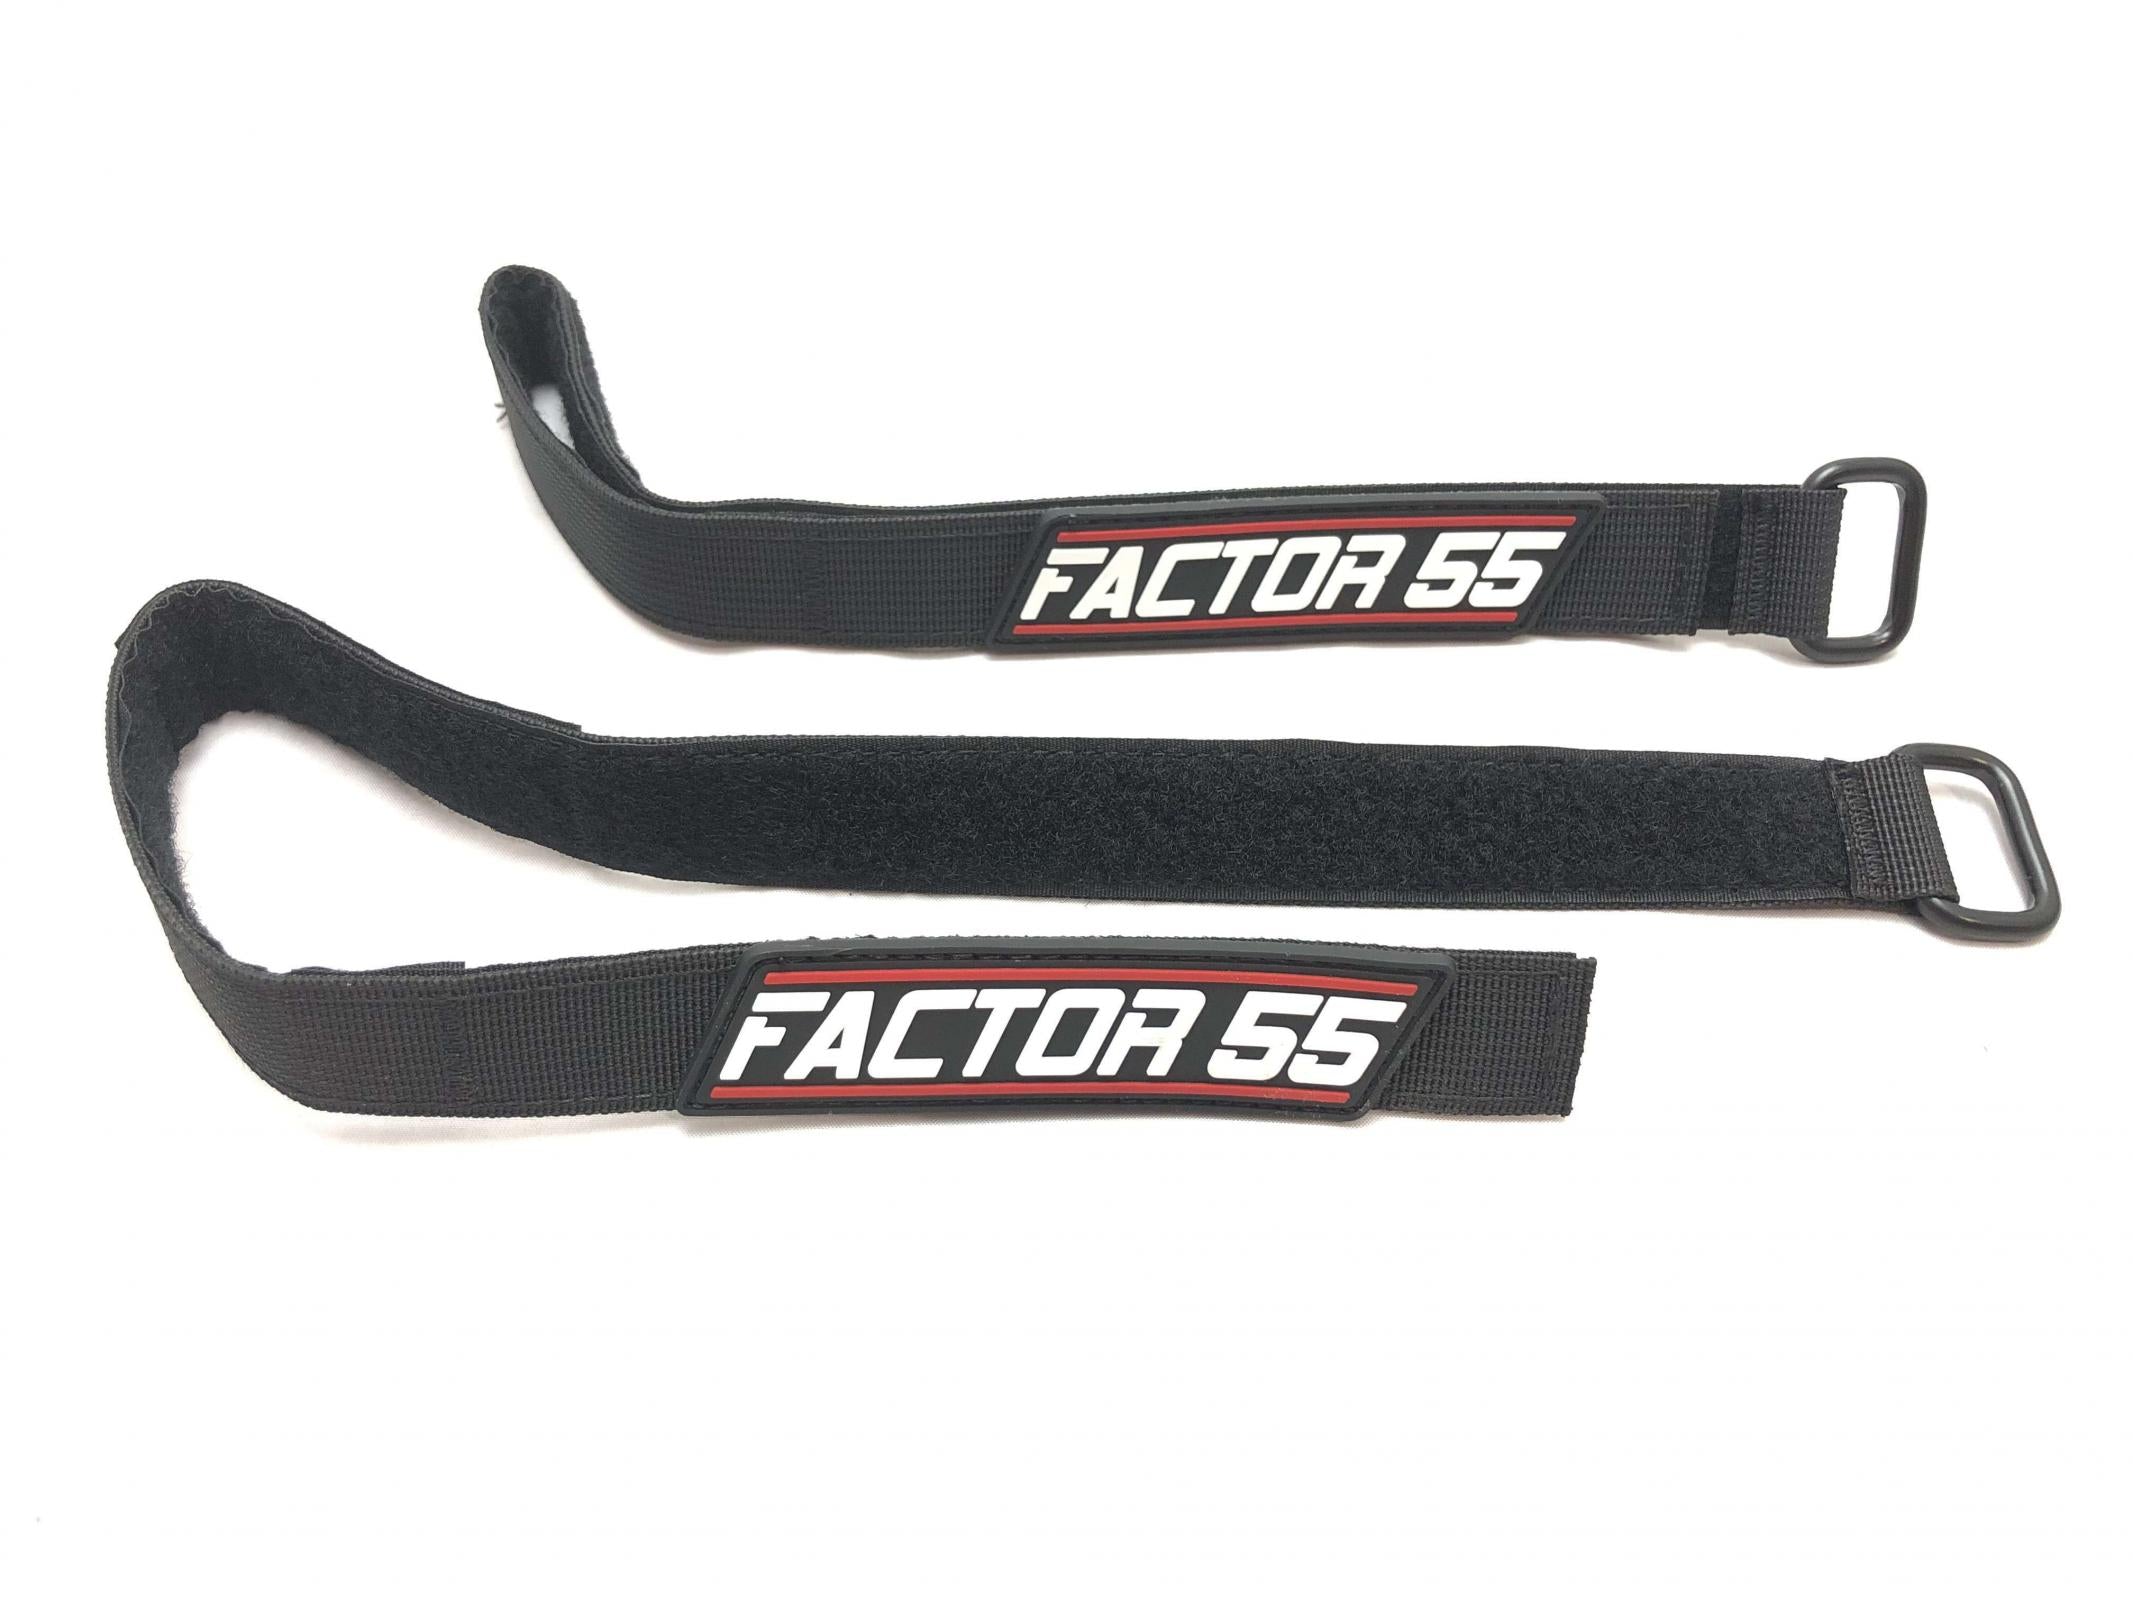 Factor 55 Strap Wraps (2-Pack)